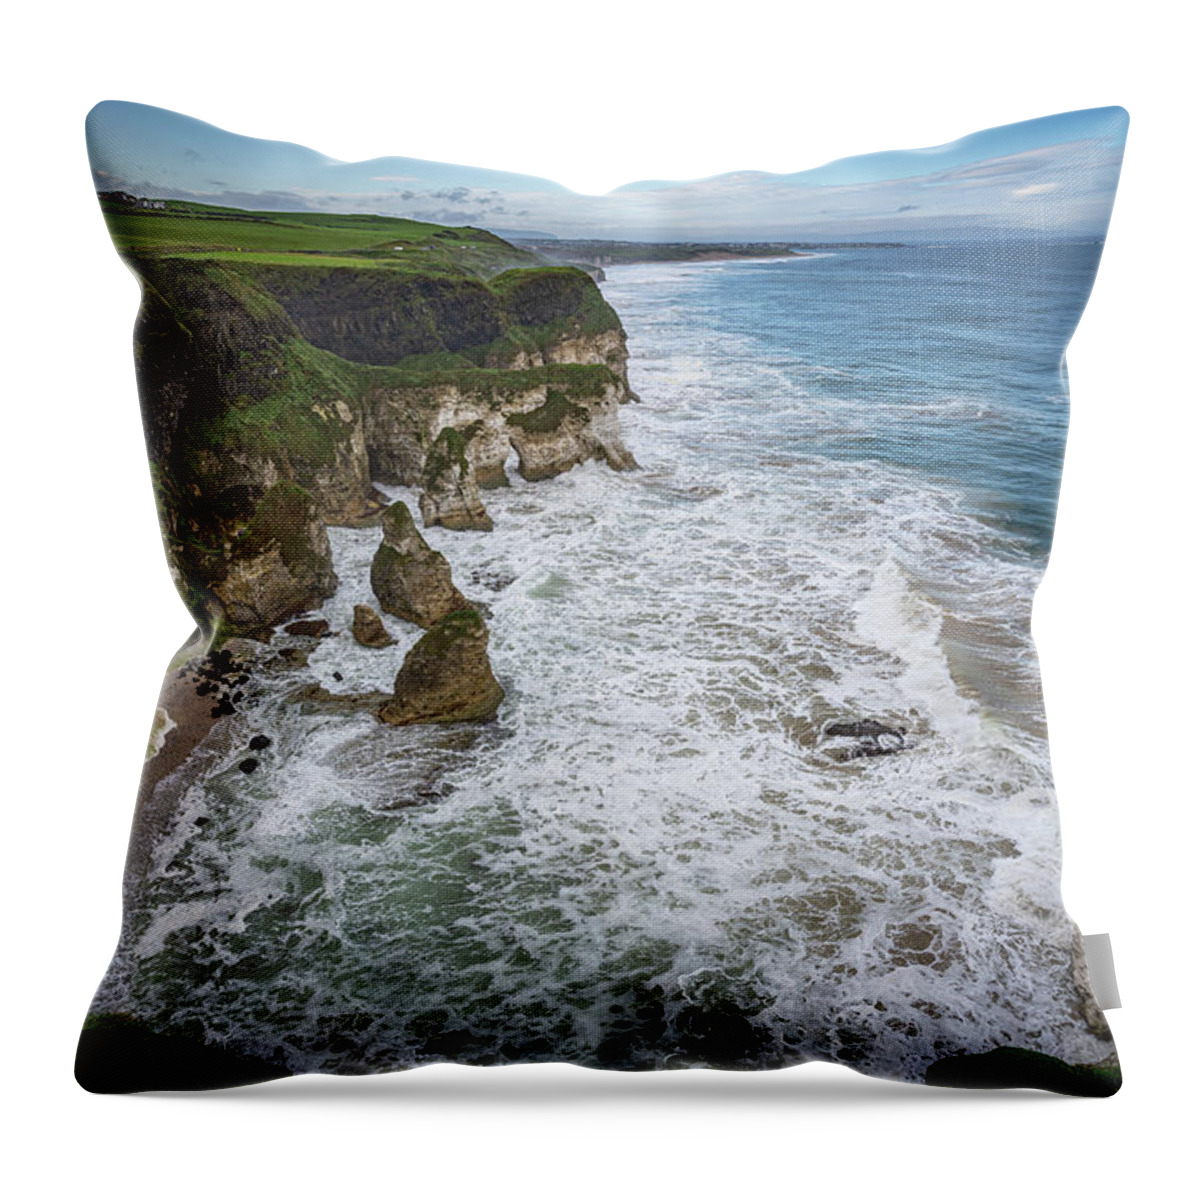 Wishing Throw Pillow featuring the photograph The Wishing Arch 2 by Nigel R Bell